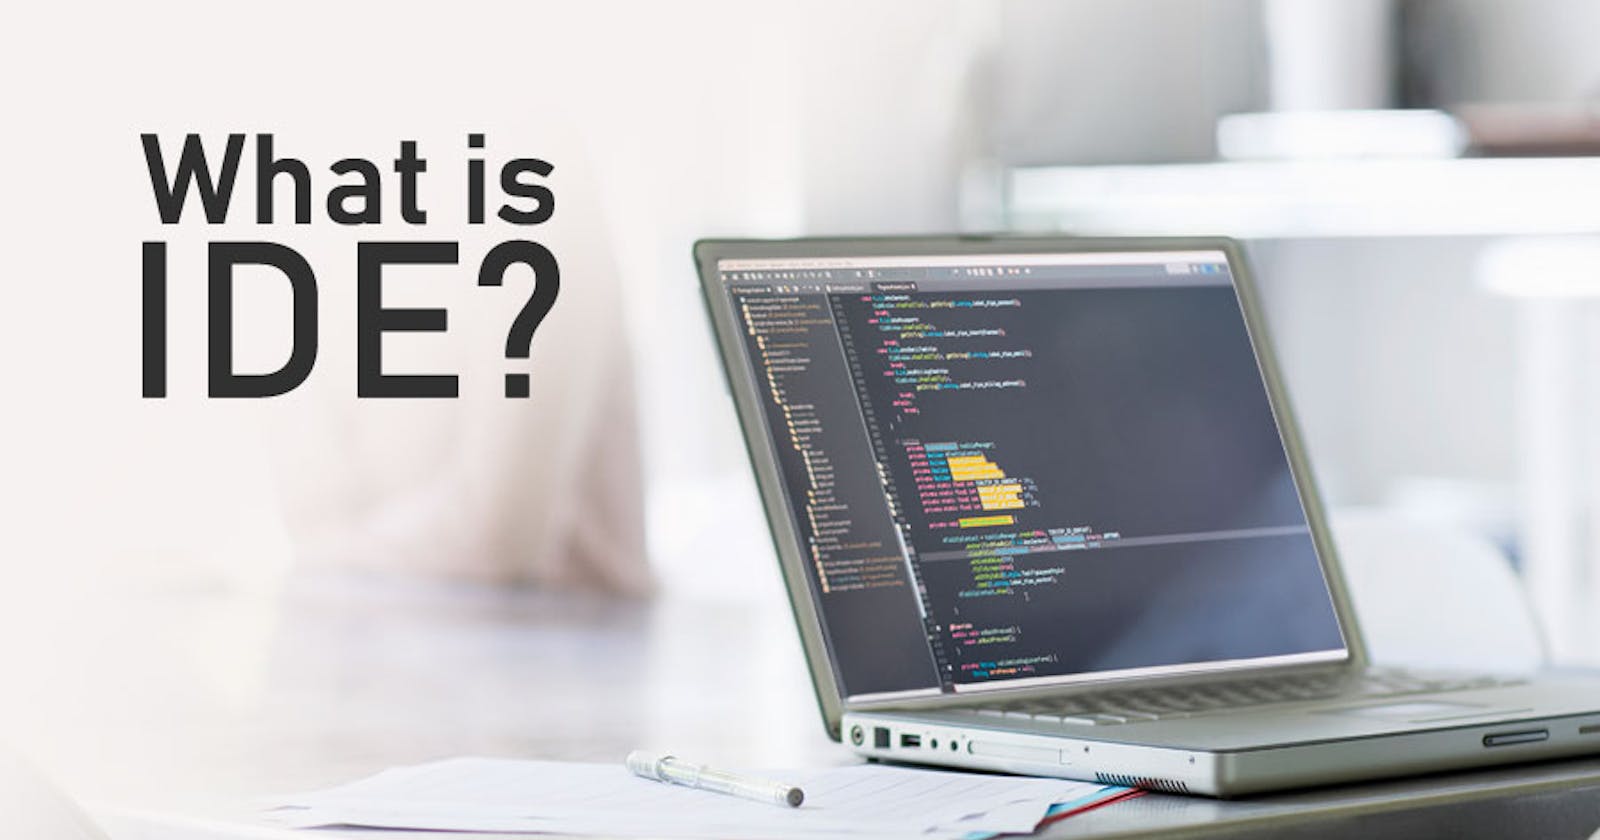 understand the integrated development environment (IDE) and Compare Eclipse and Spring Tool Suite (STS) for Spring Boot Application Development